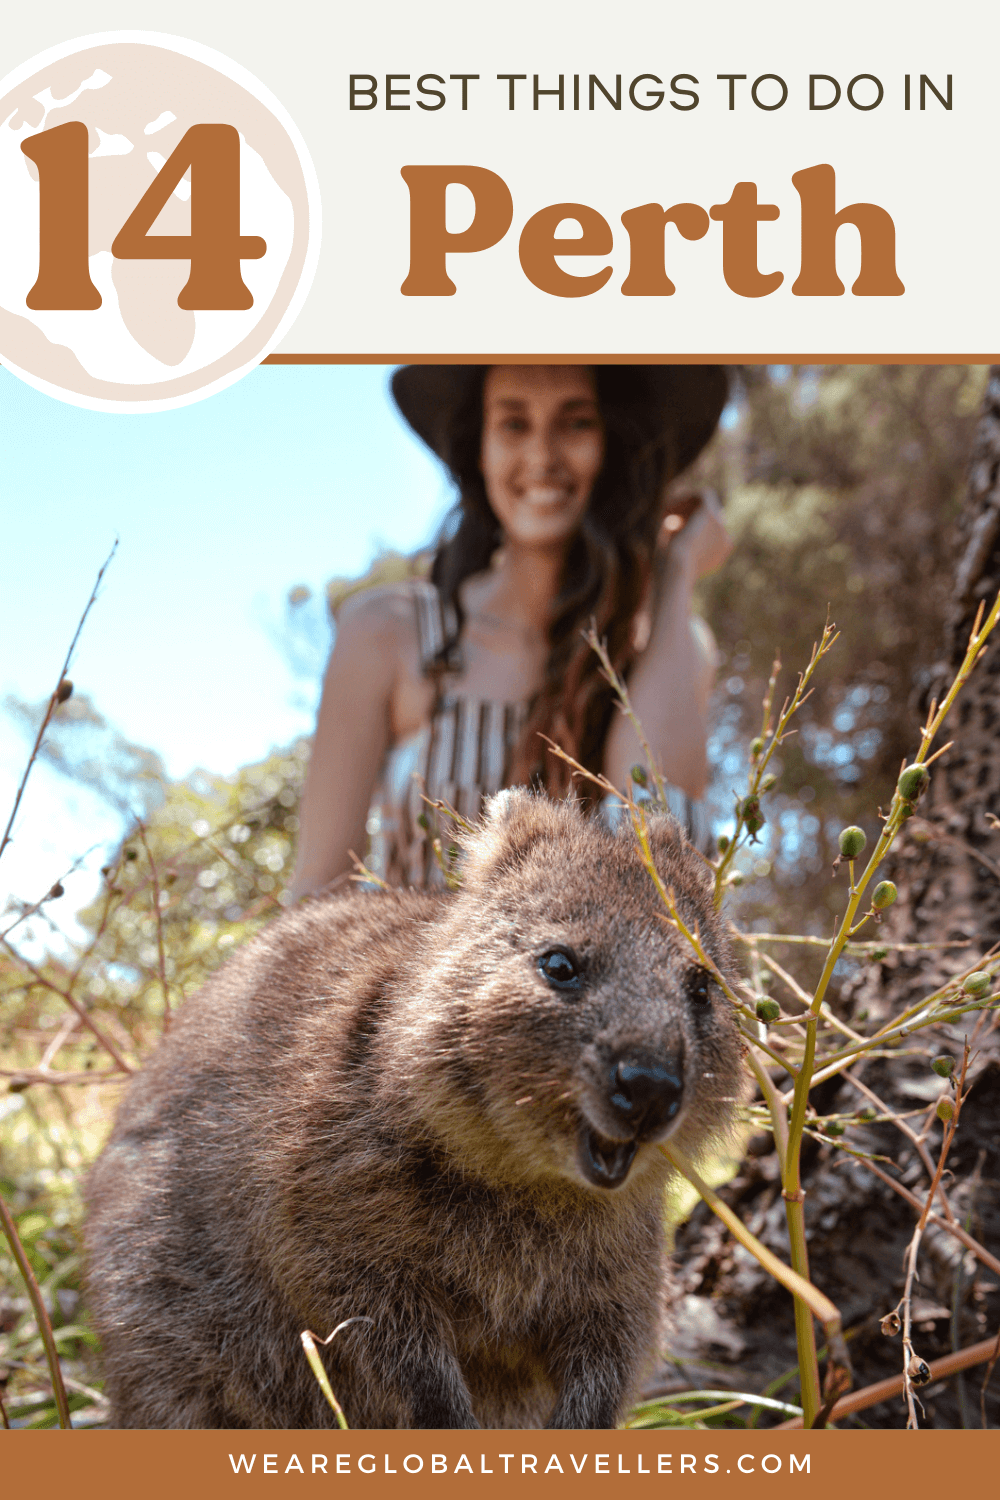 The best things to do in Perth, Western Australia